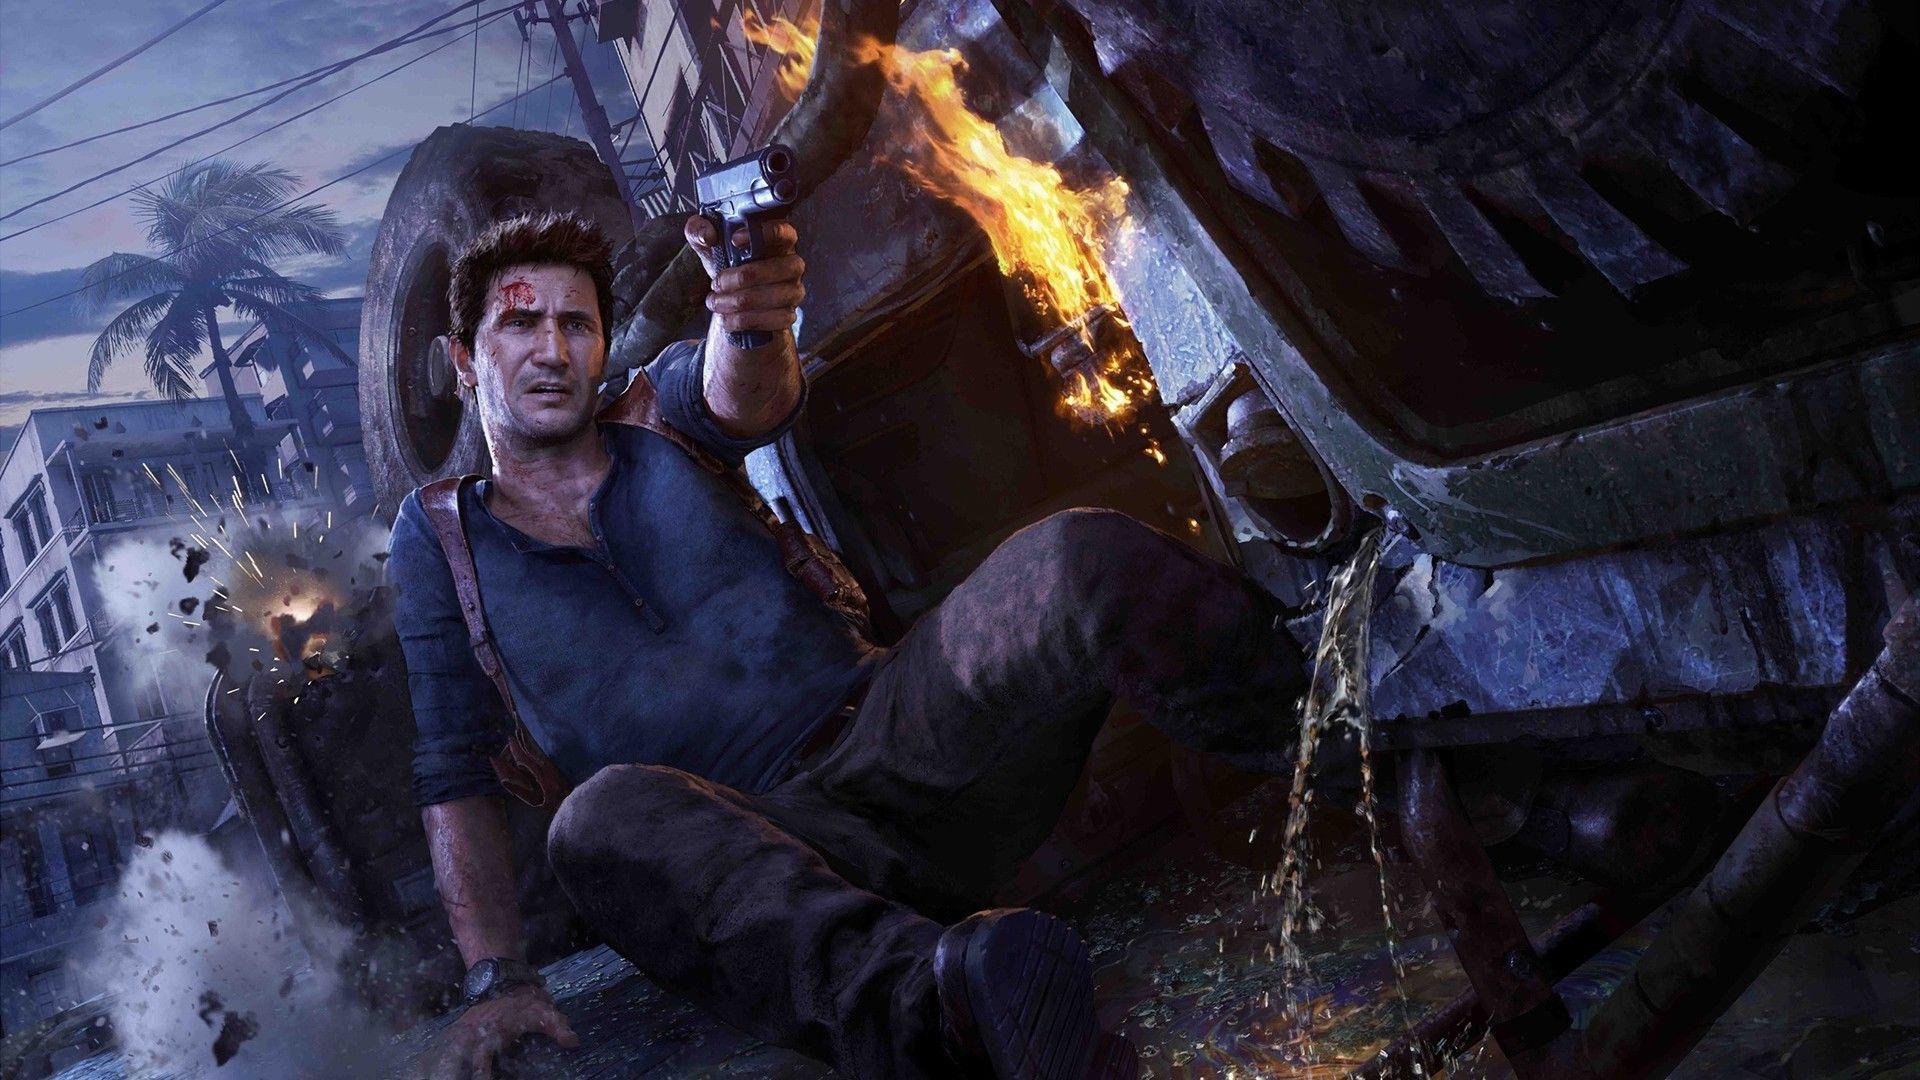 uncharted 1 pc download completo portugues